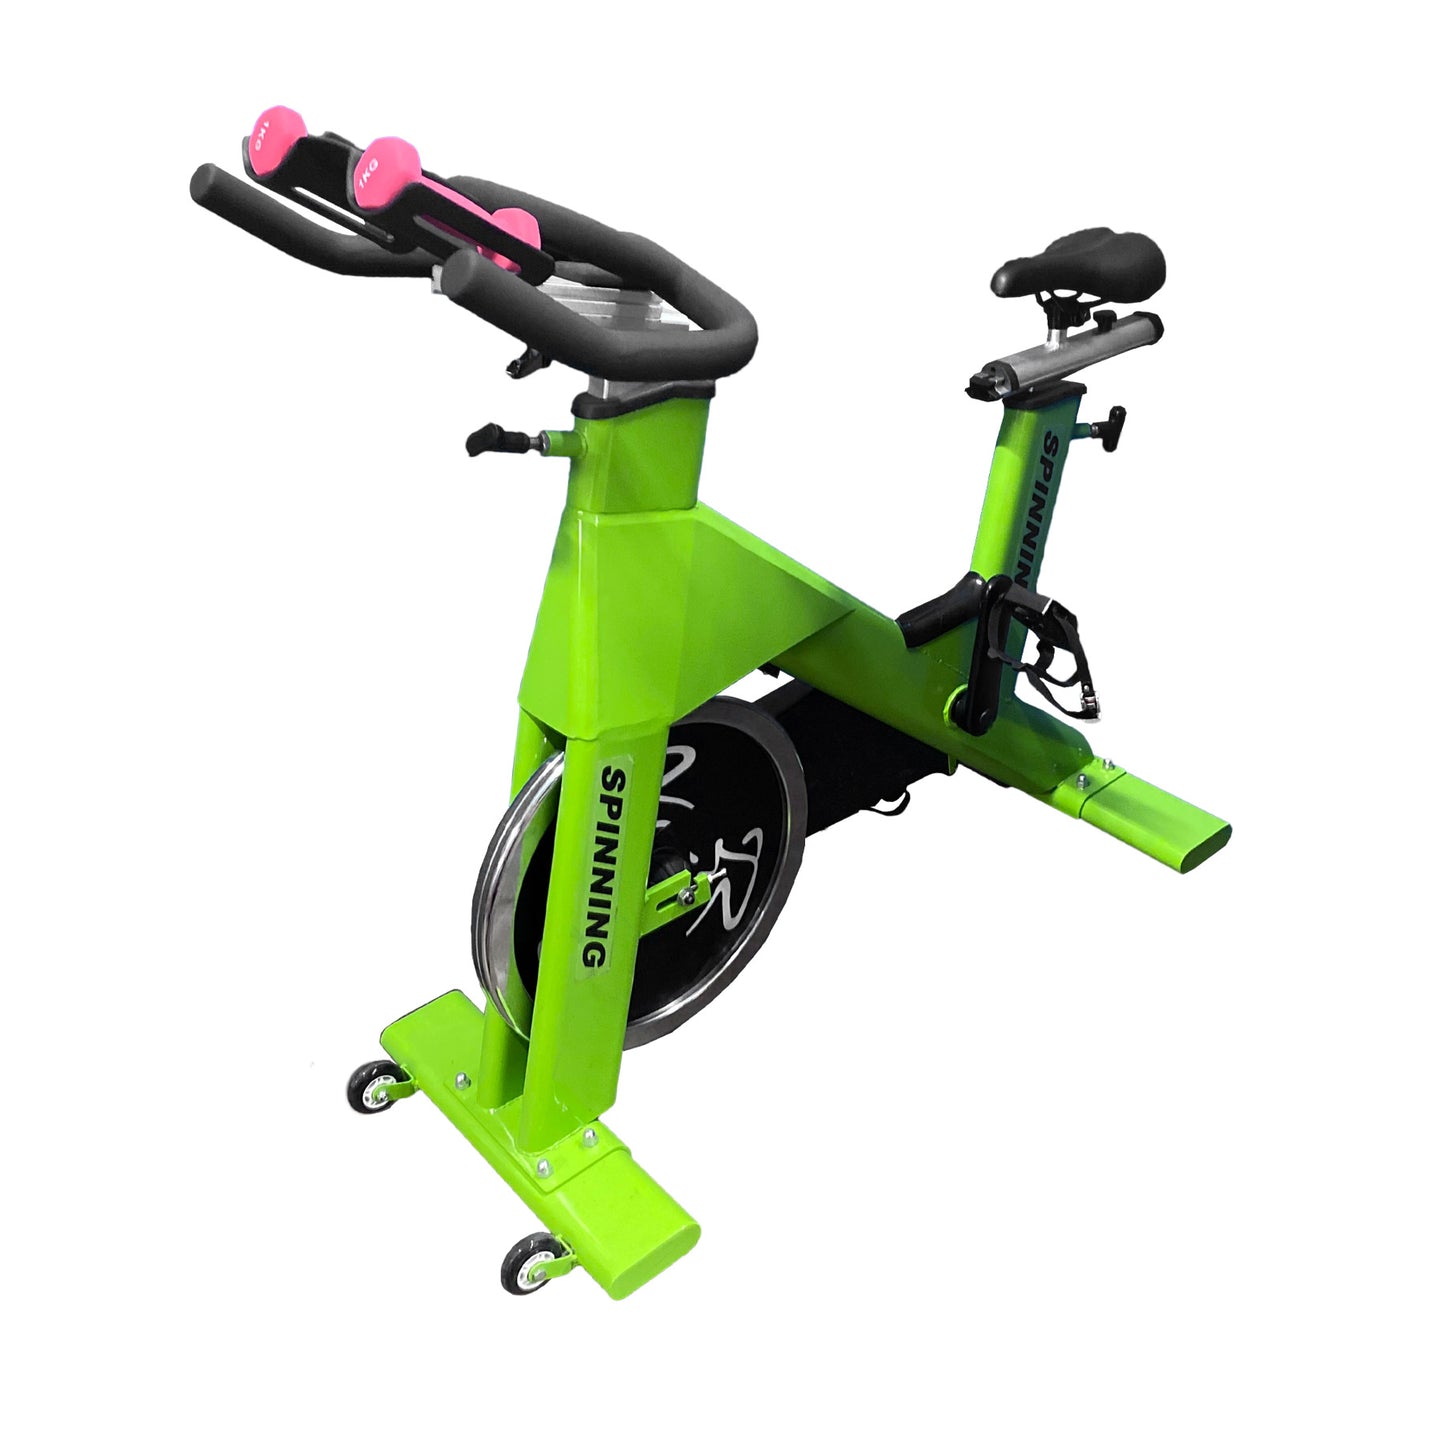 Deluxe Spin Bike (green)